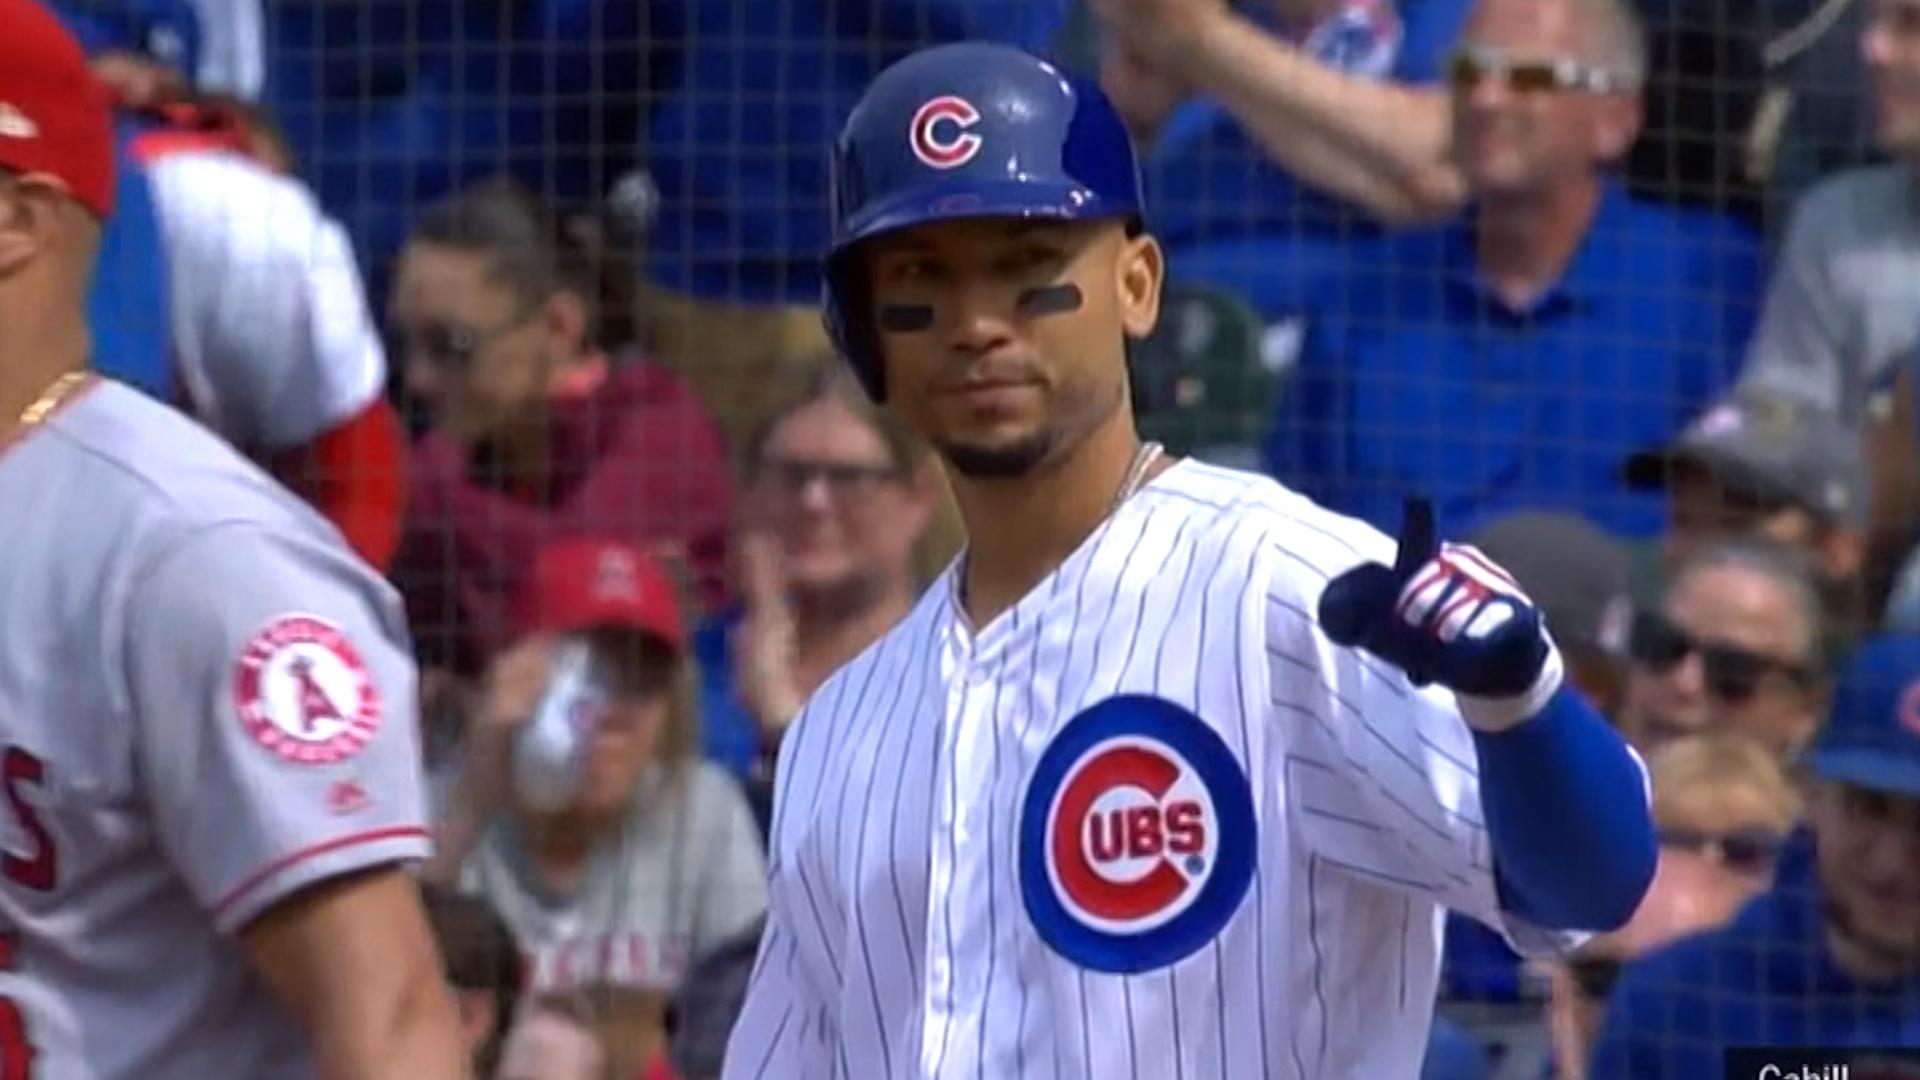 Carlos González secures his first hit as a Chicago Cub. NBC